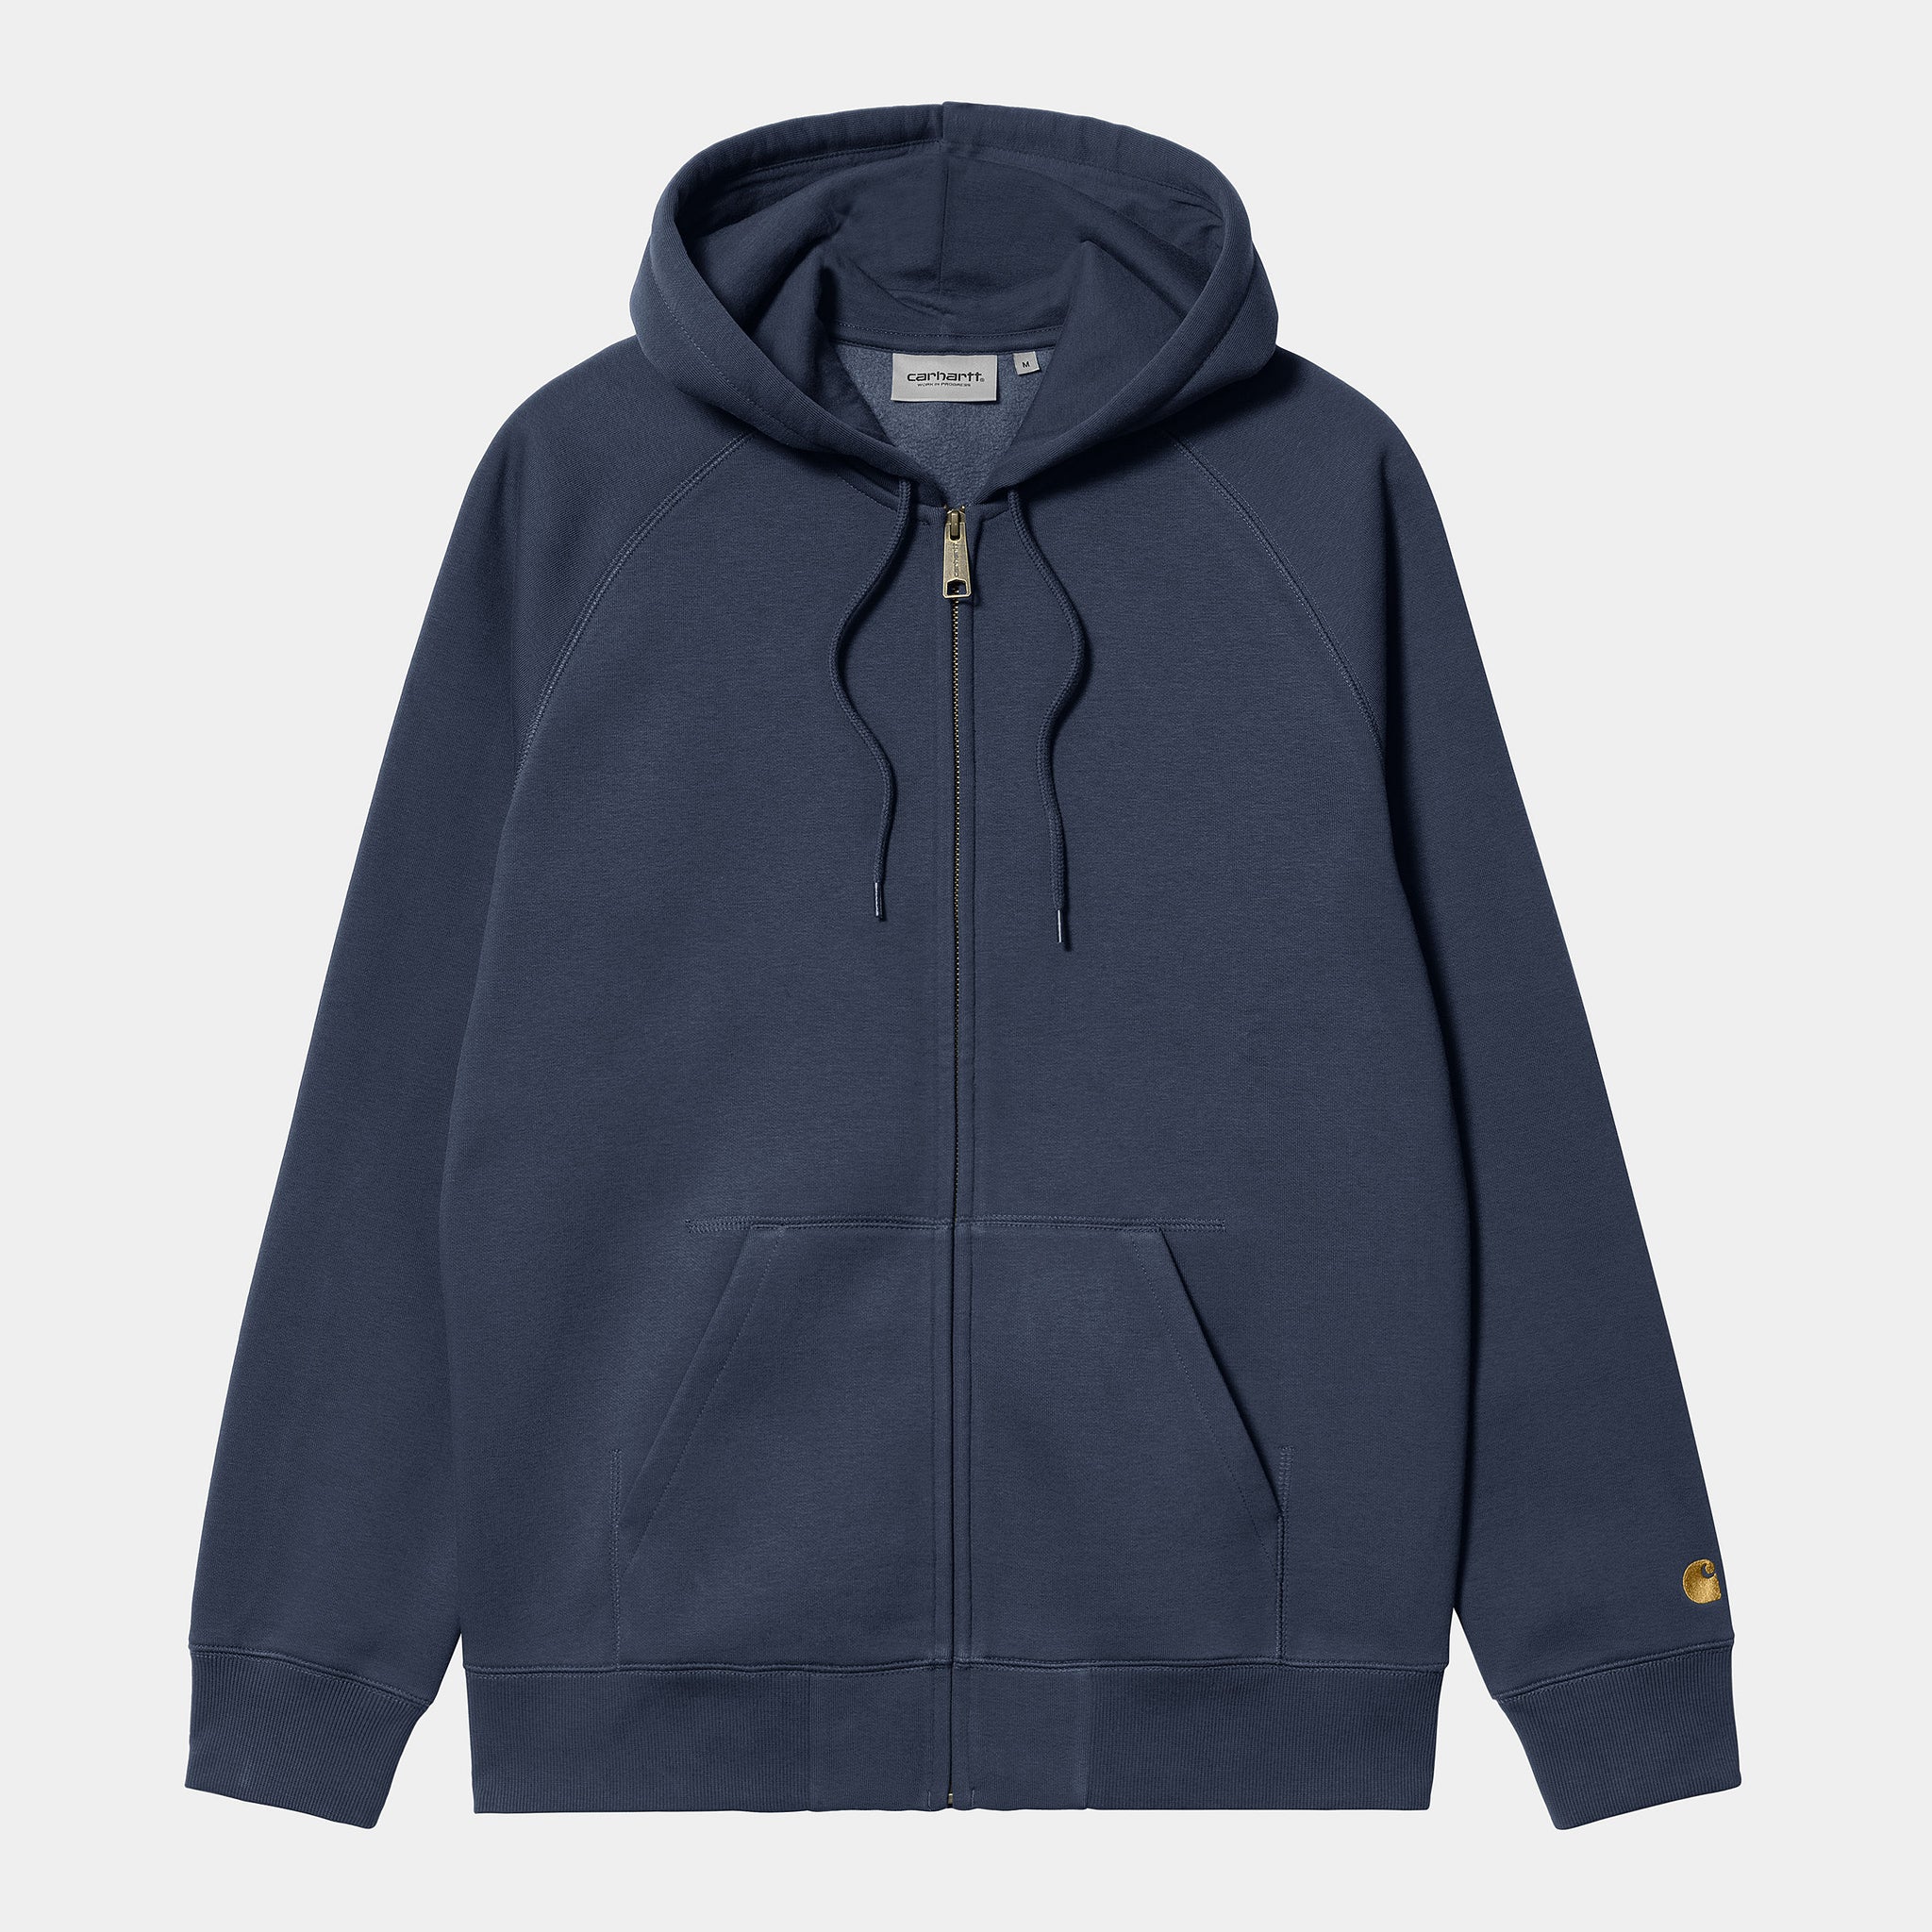 Carhartt Hooded Chase Jacket - Blue/Gold